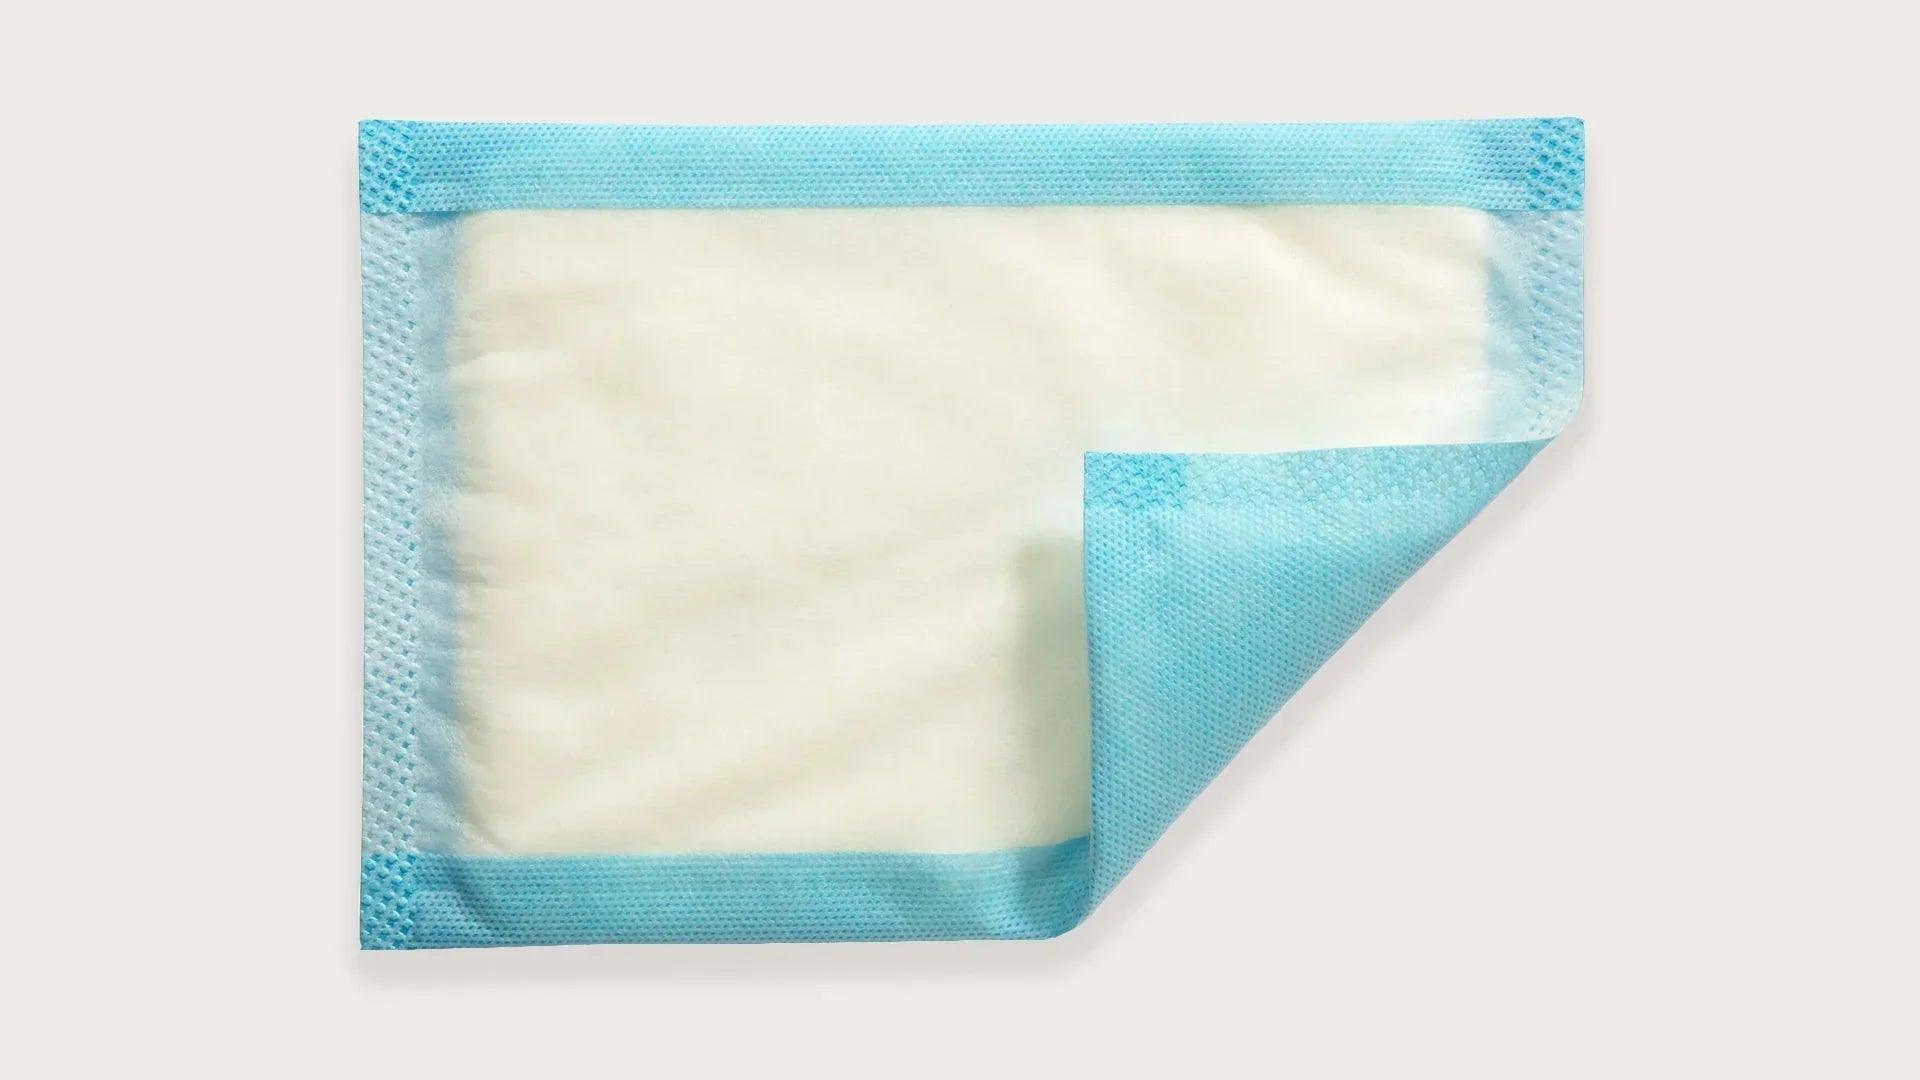 Mesorb Absorbent Dressing by Molnlycke